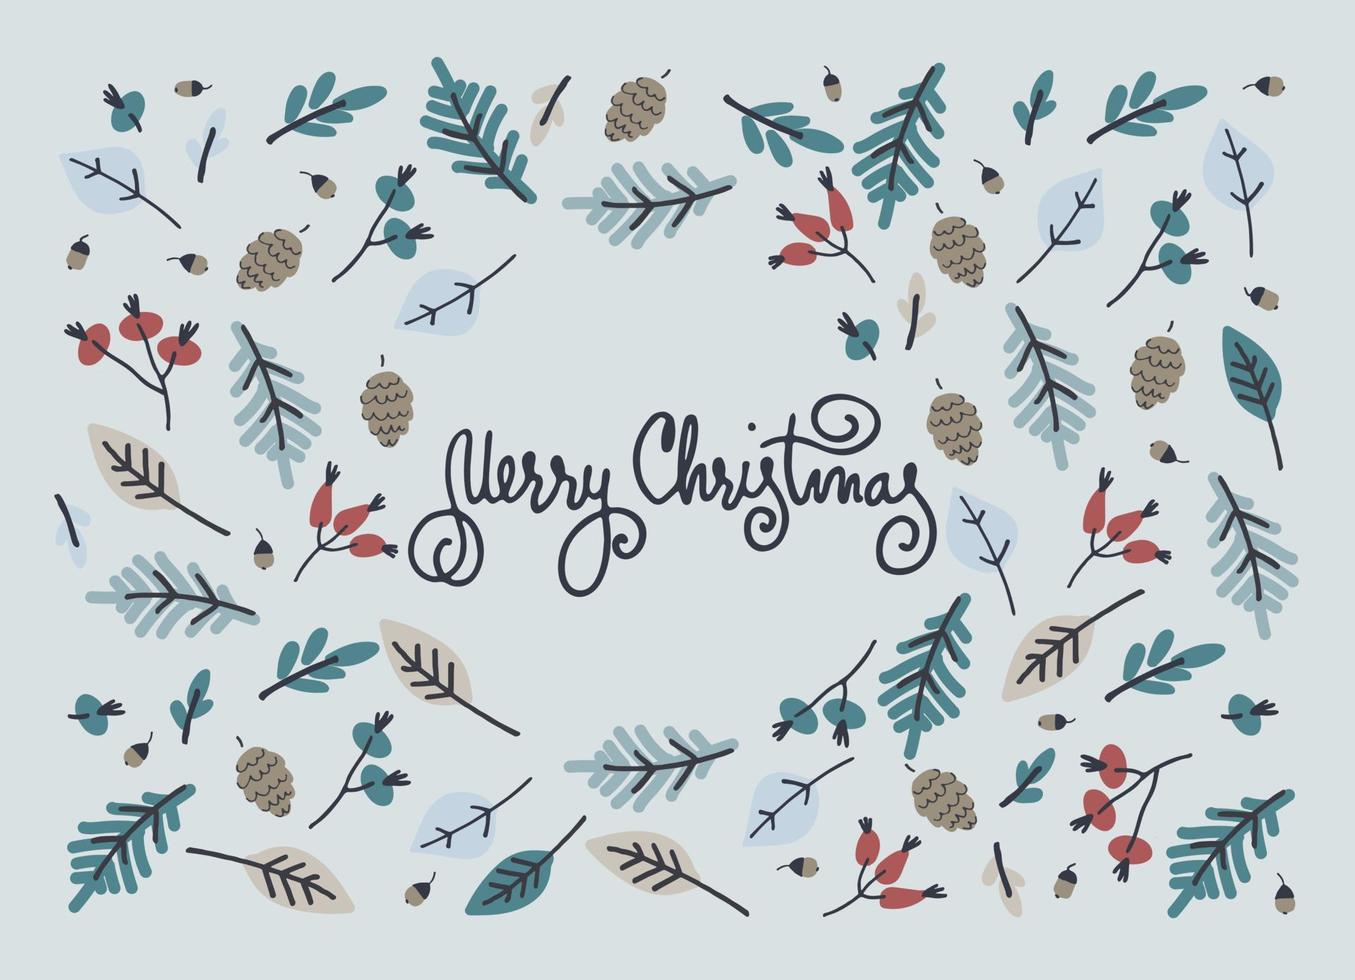 Merry Christmas greeting card template. Minimalistic design with branch arrangement. Twigs with leaves and berries in a cup, snowflakes, hand lettering on blue background vector